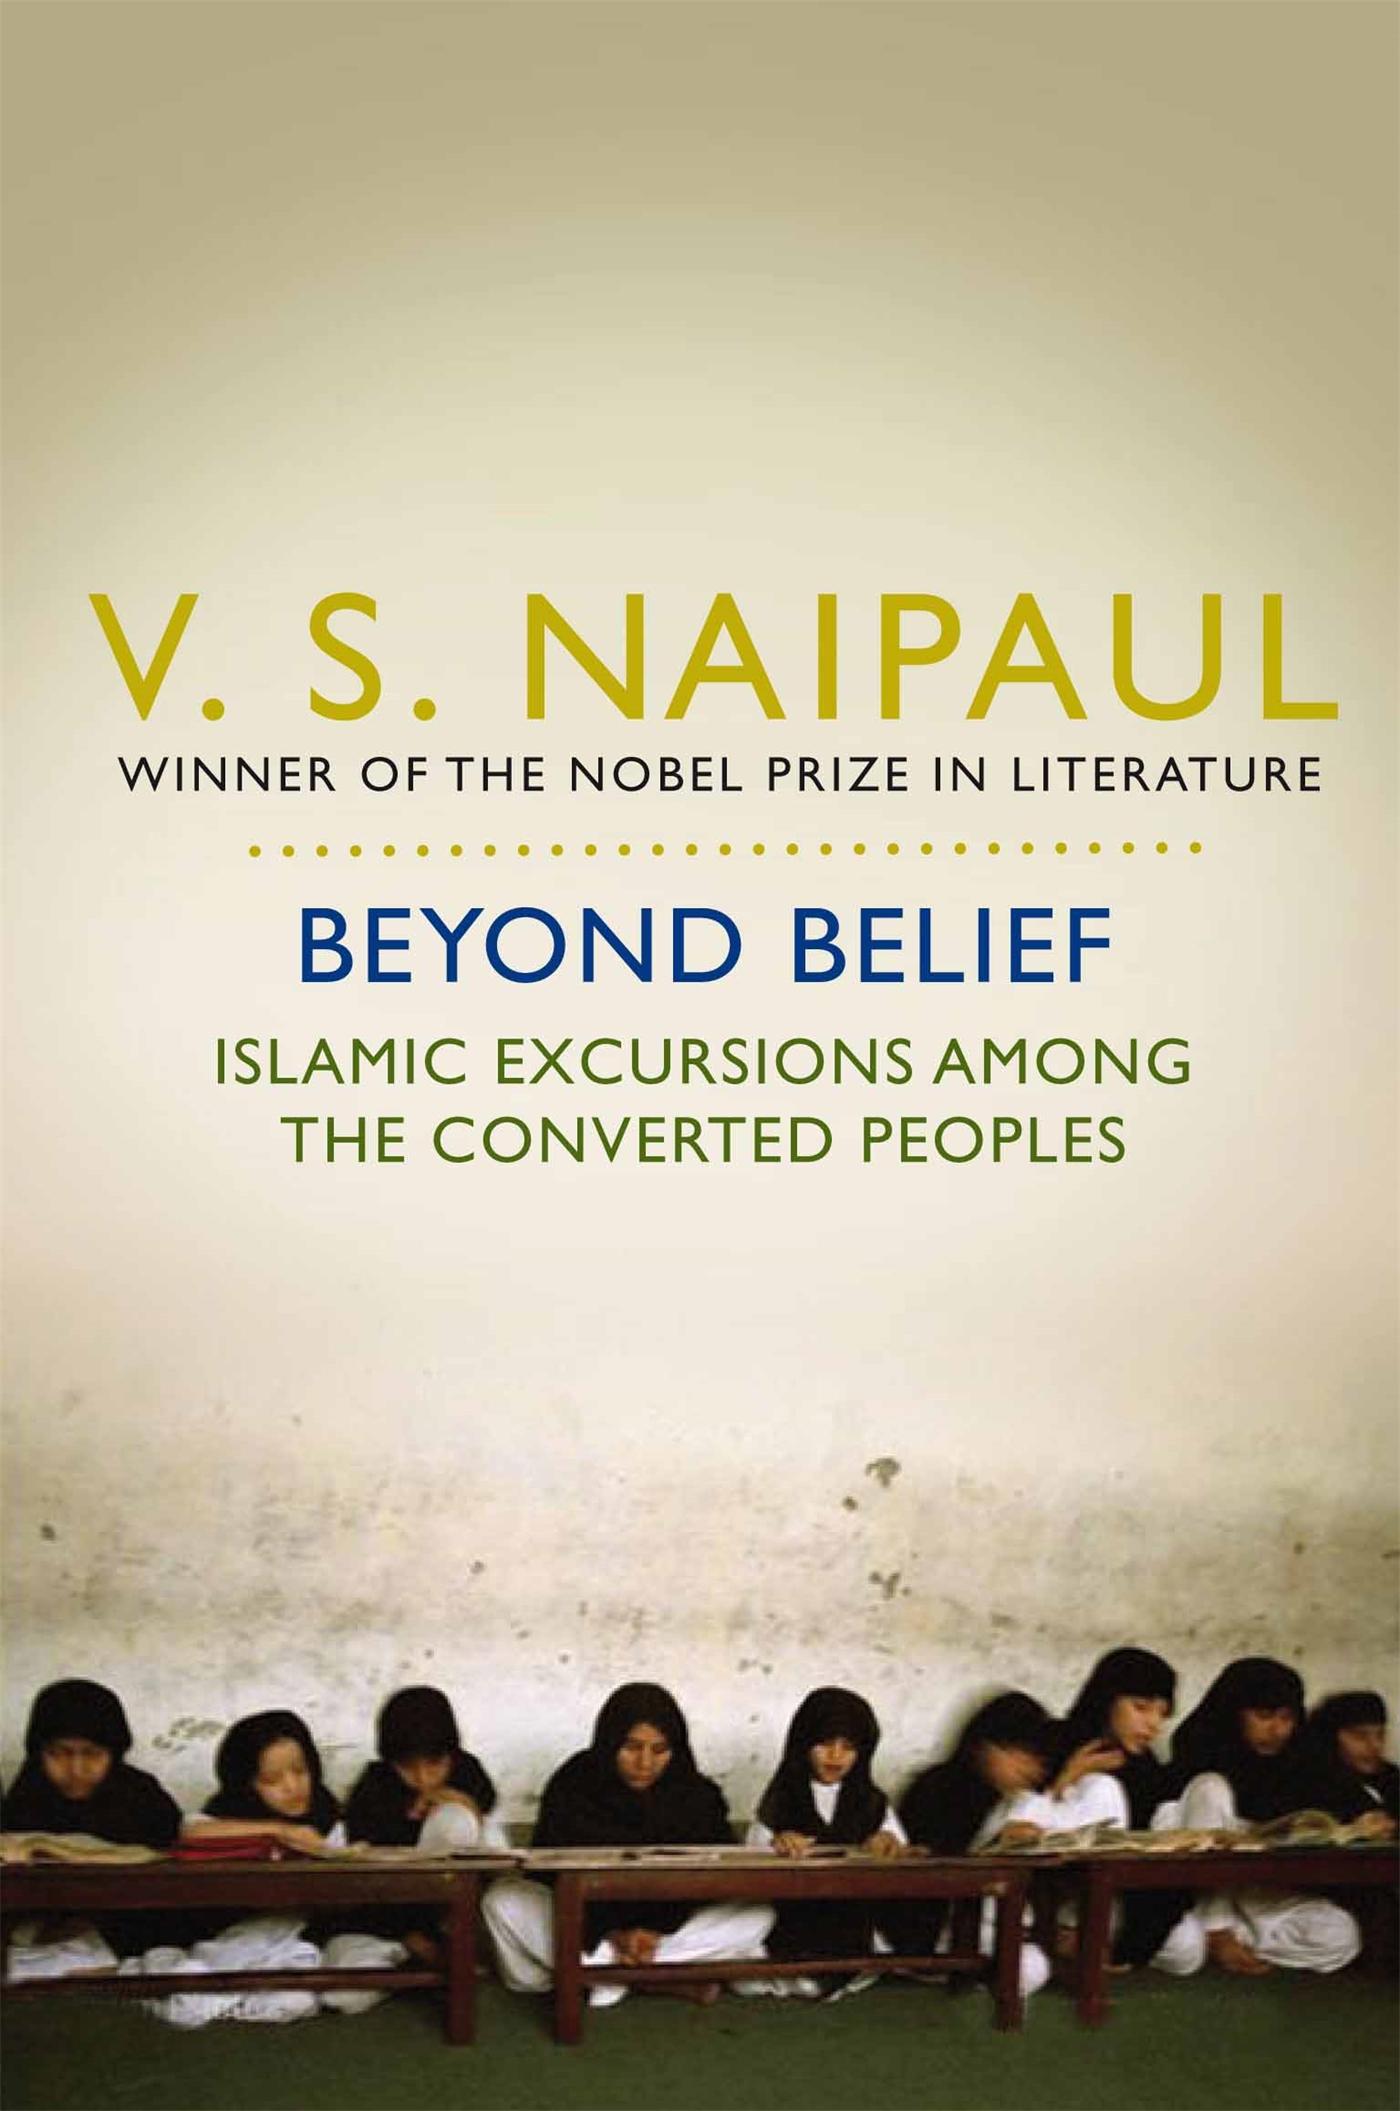 Beyond Belief | Islamic Excursions Among the Converted Peoples | V. S. Naipaul | Taschenbuch | 436 S. | Deutsch | 2010 | Pan Macmillan | EAN 9780330517874 - Naipaul, V. S.